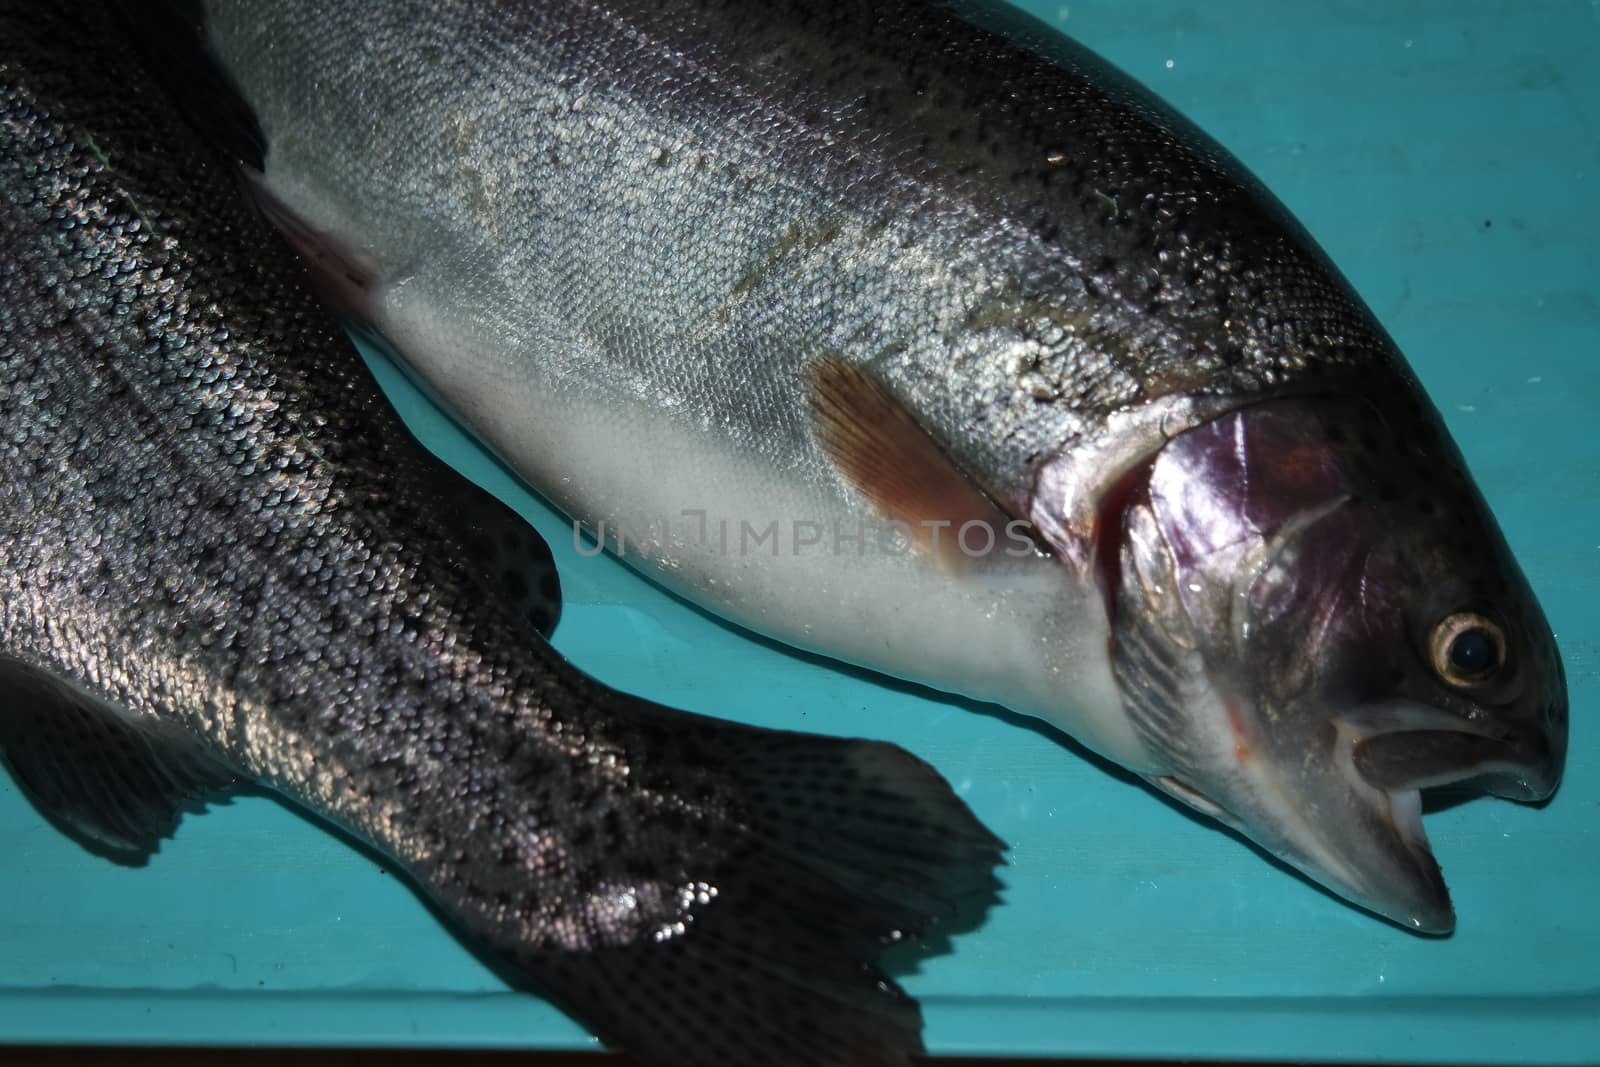 Fish closeup with a gray or grey and silver shiny skin scales by Photochowk